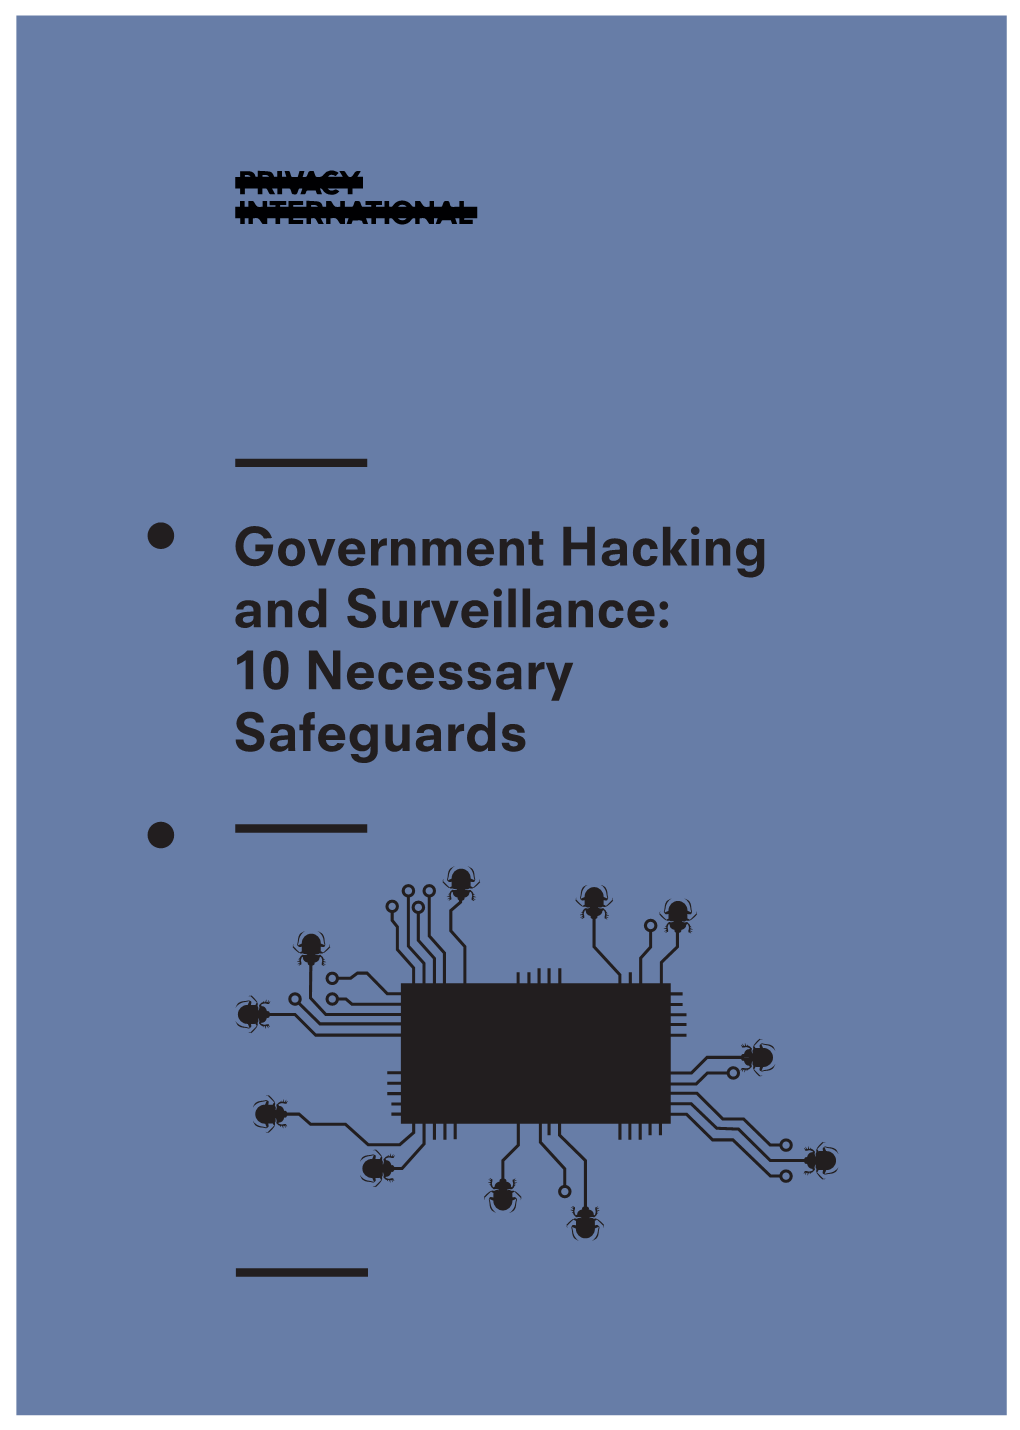 Government Hacking and Surveillance: 10 Necessary Safeguards